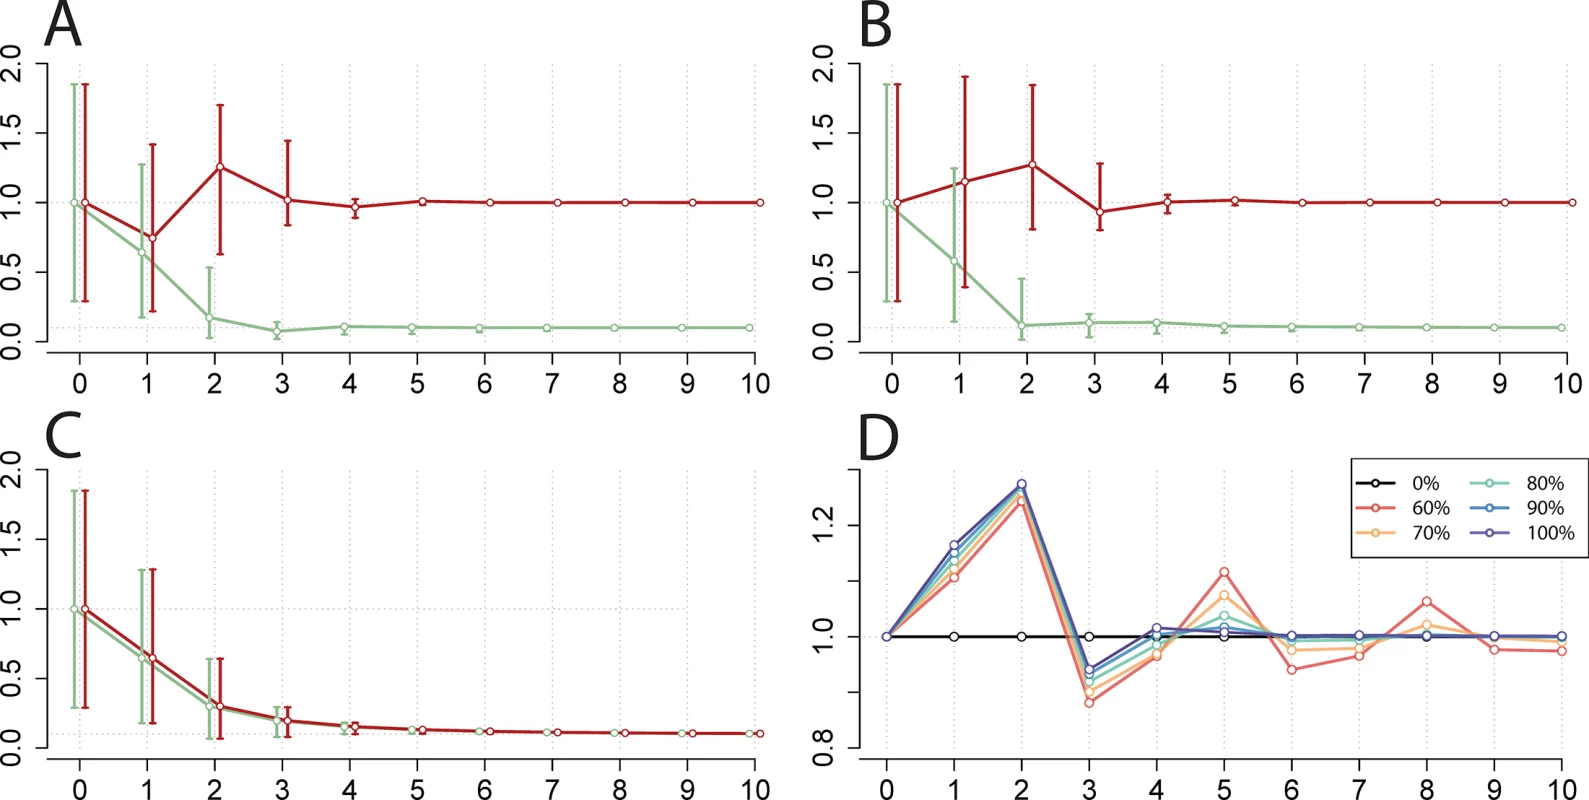 Simulation of national EV-A71 vaccination and corresponding change in CV-A16 incidence.